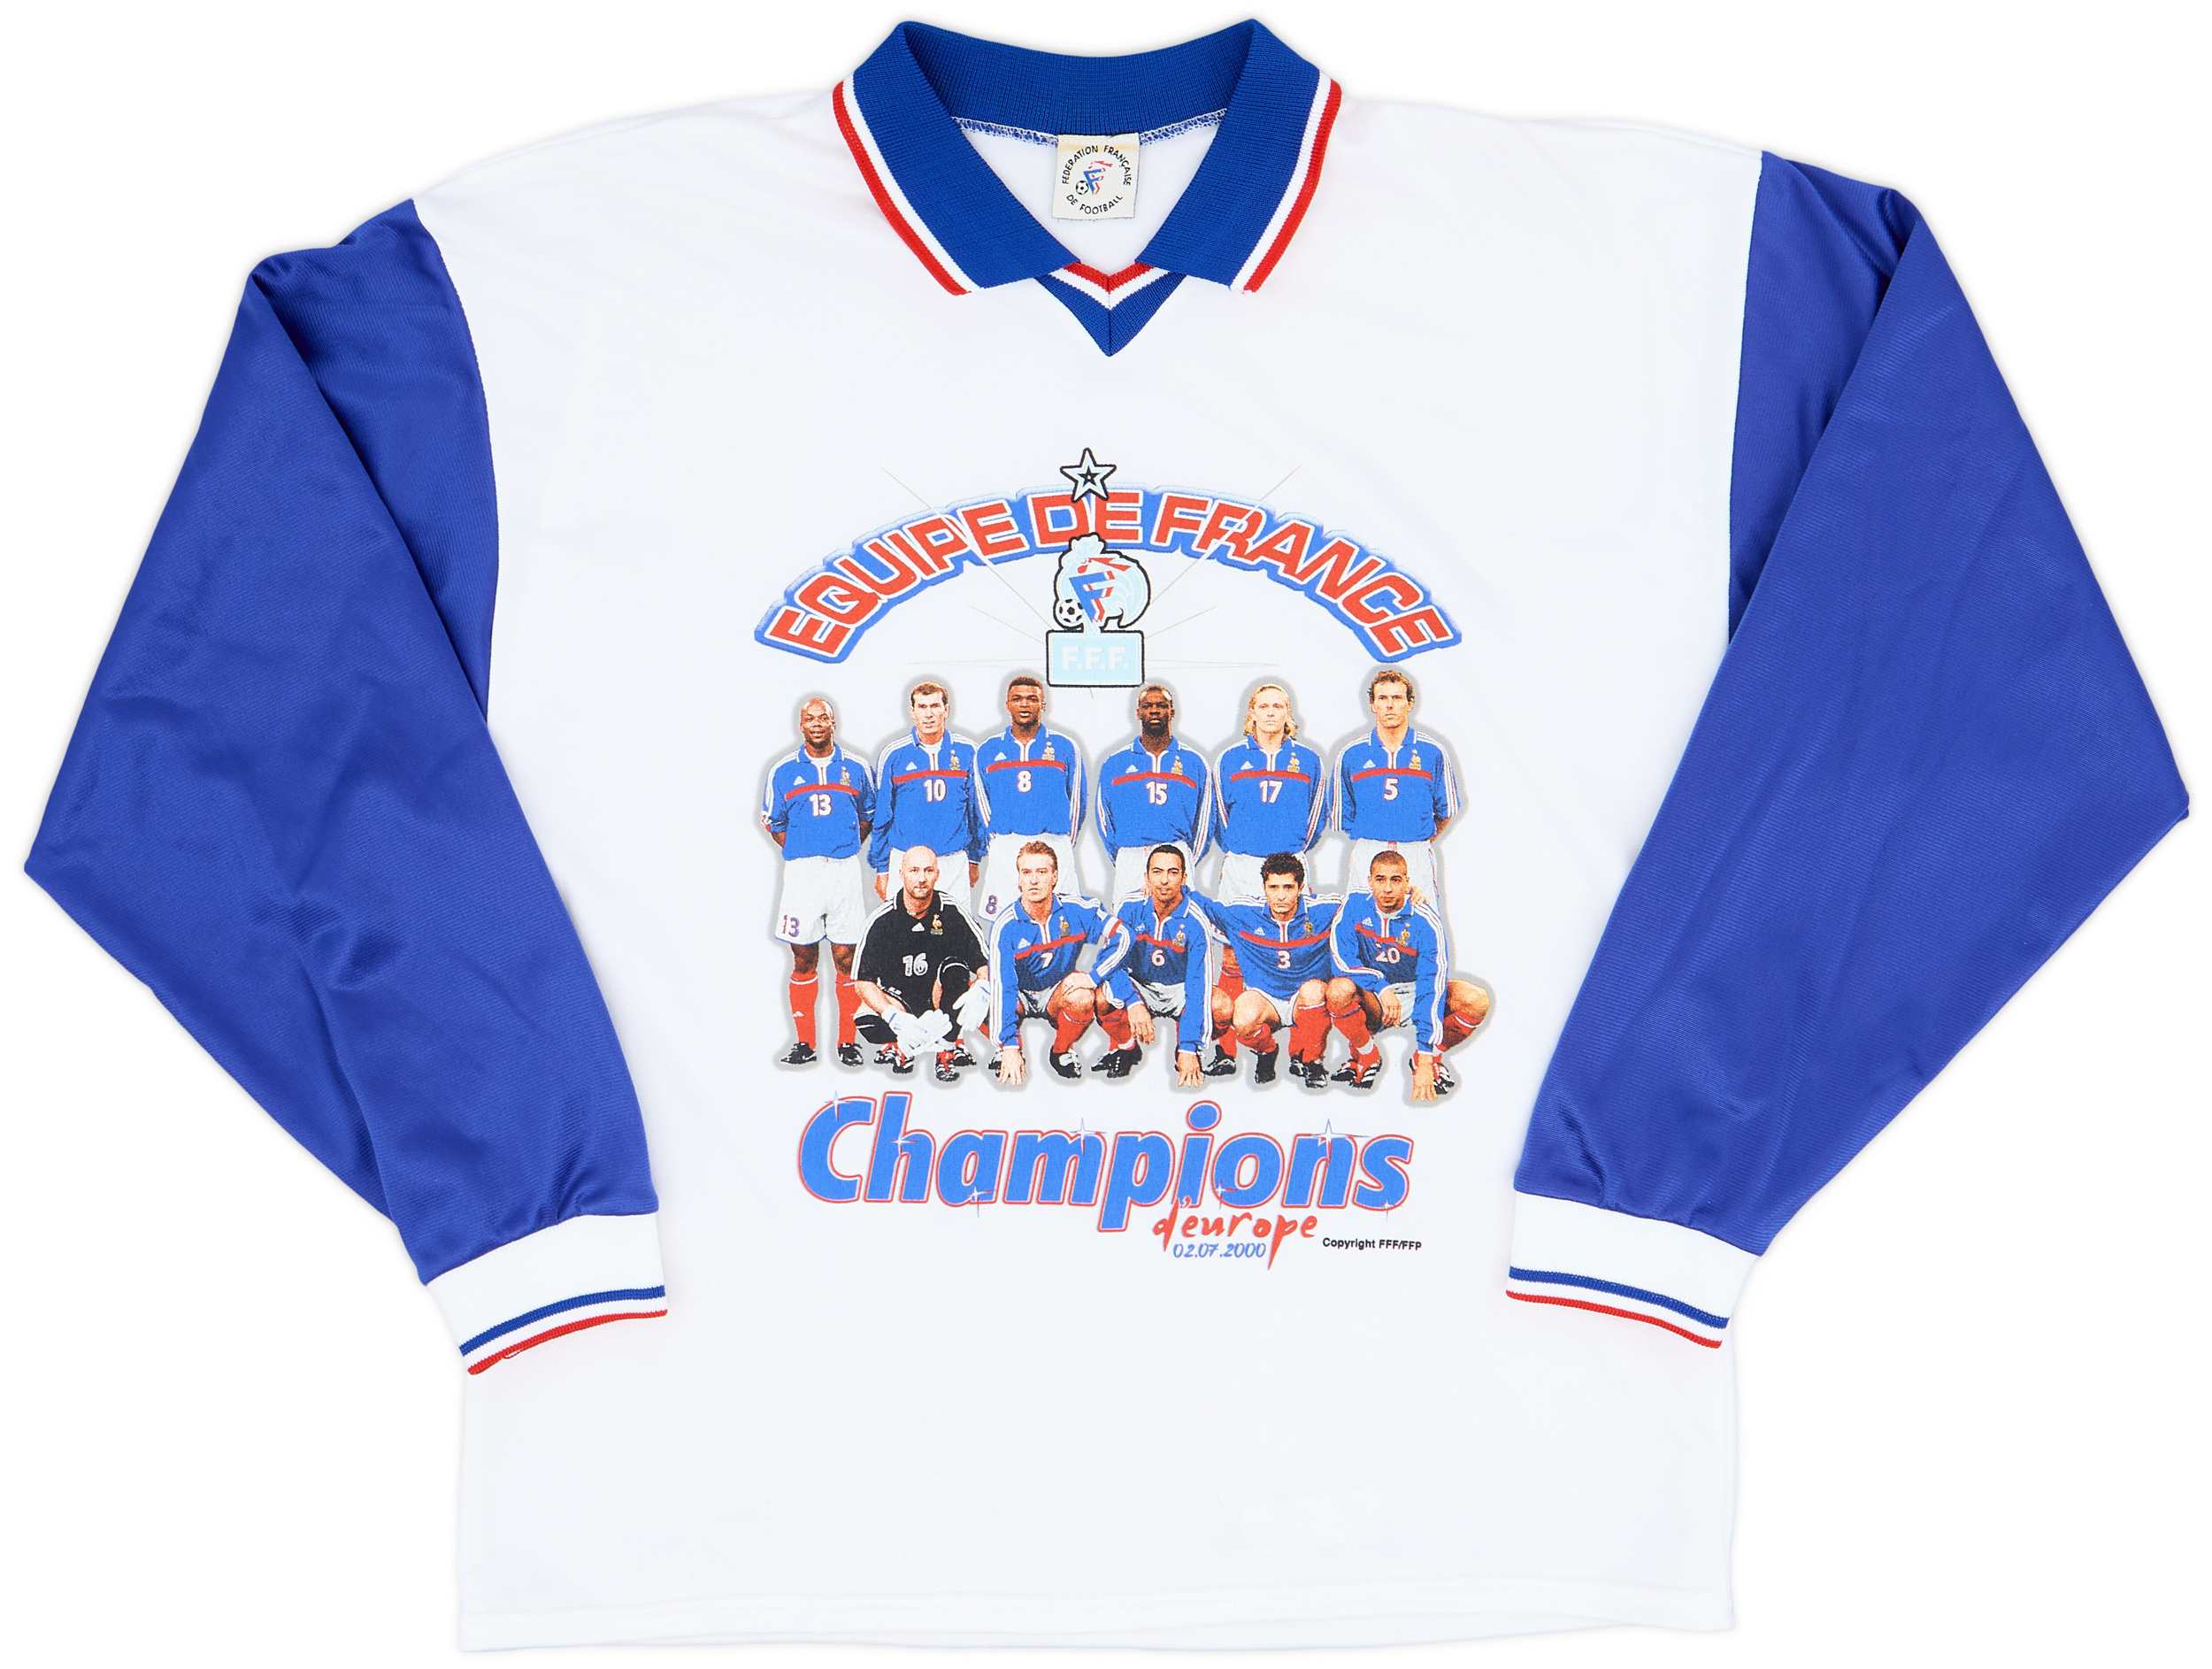 2000 France 'Champions of Europe' Shirt - 8/10 - ()